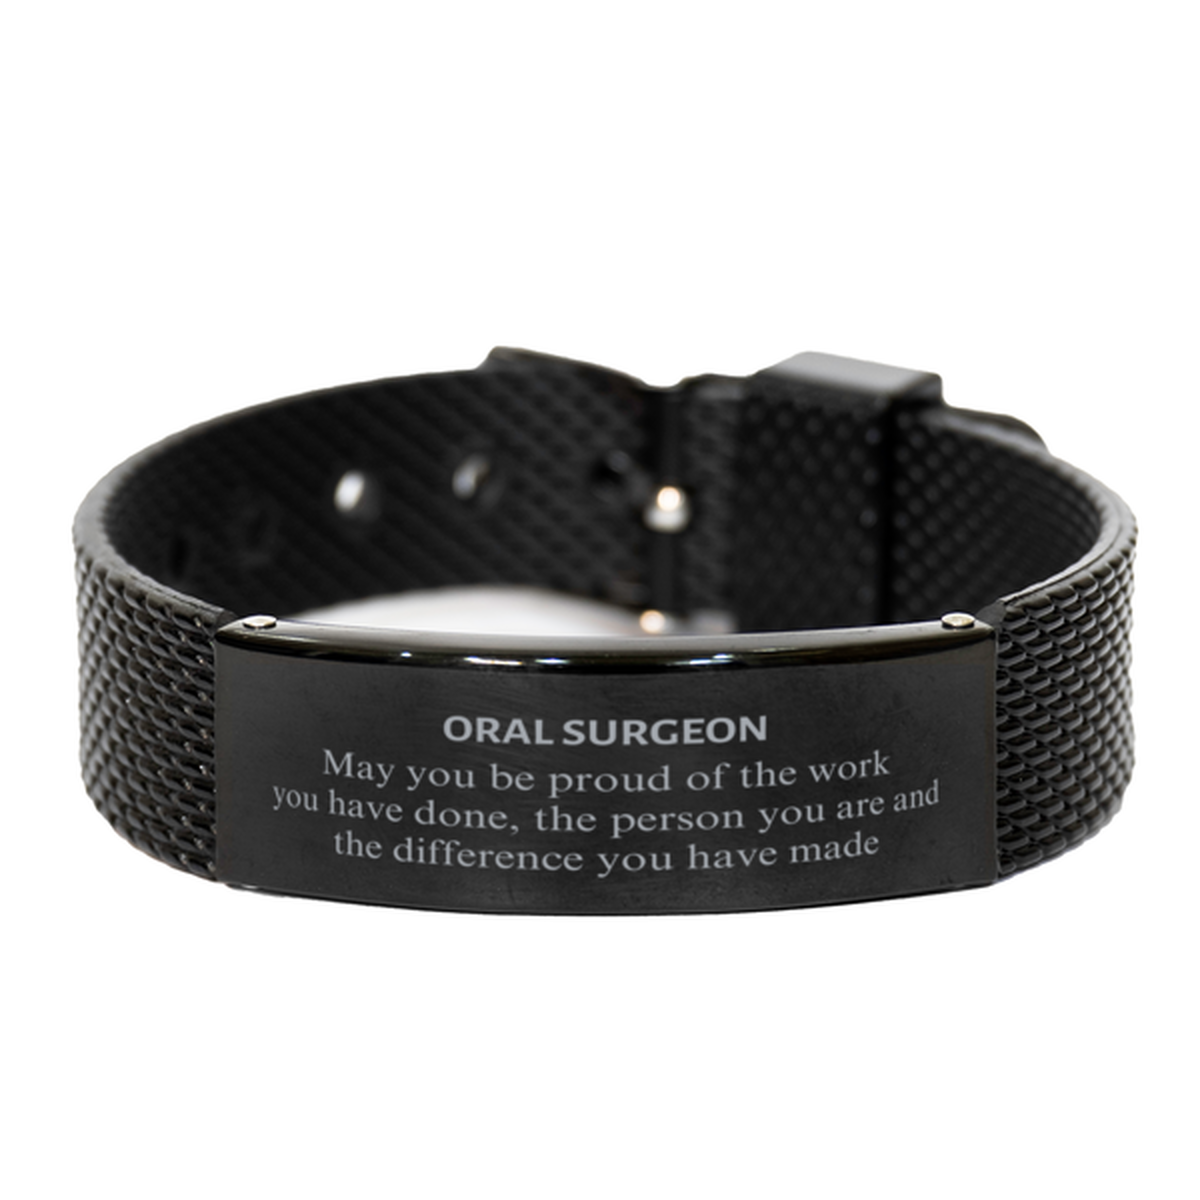 Oral Surgeon May you be proud of the work you have done, Retirement Oral Surgeon Black Shark Mesh Bracelet for Colleague Appreciation Gifts Amazing for Oral Surgeon